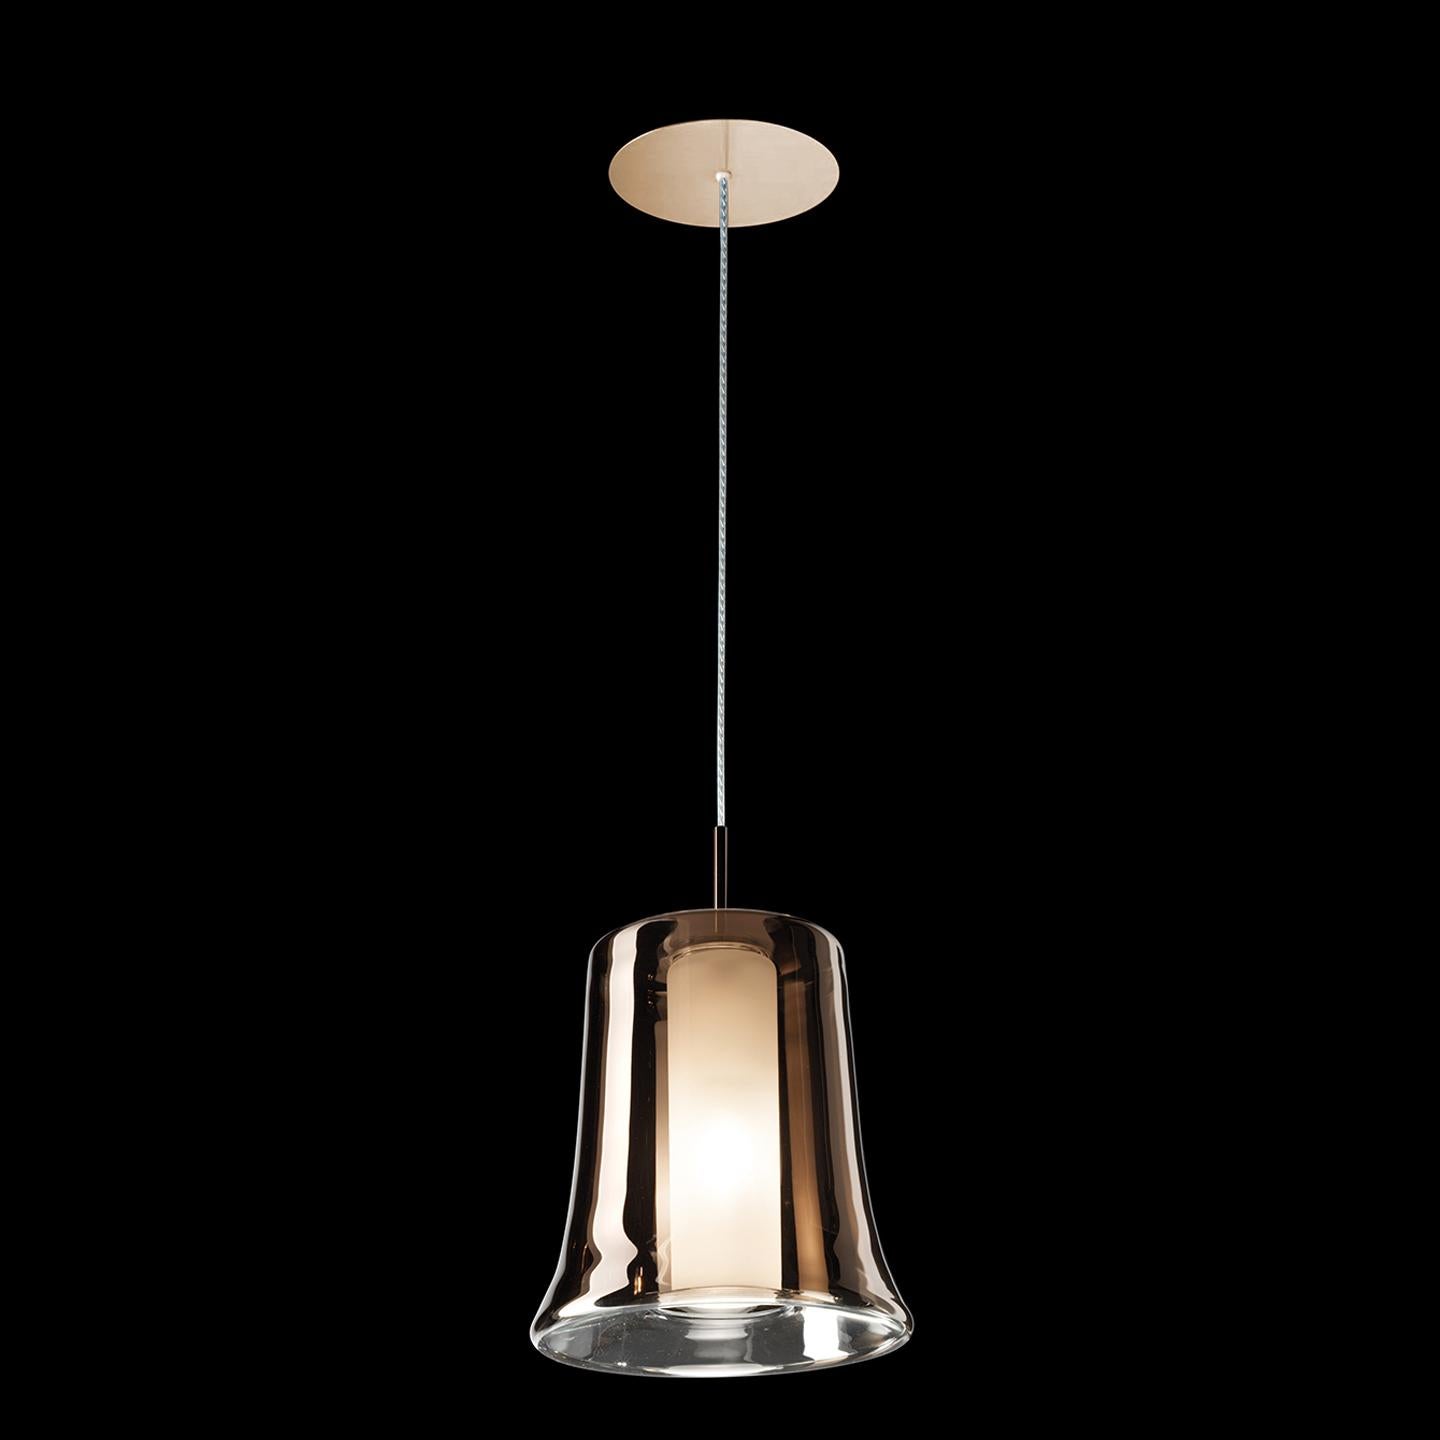 The Cloche collection was designed by Danilo De Rossi in 2013 using a clever, two-tone glass layering technique that transforms the Cloche’s simple form into a complex and dynamic lighting statement. Cloche is composed of a clear glass exterior